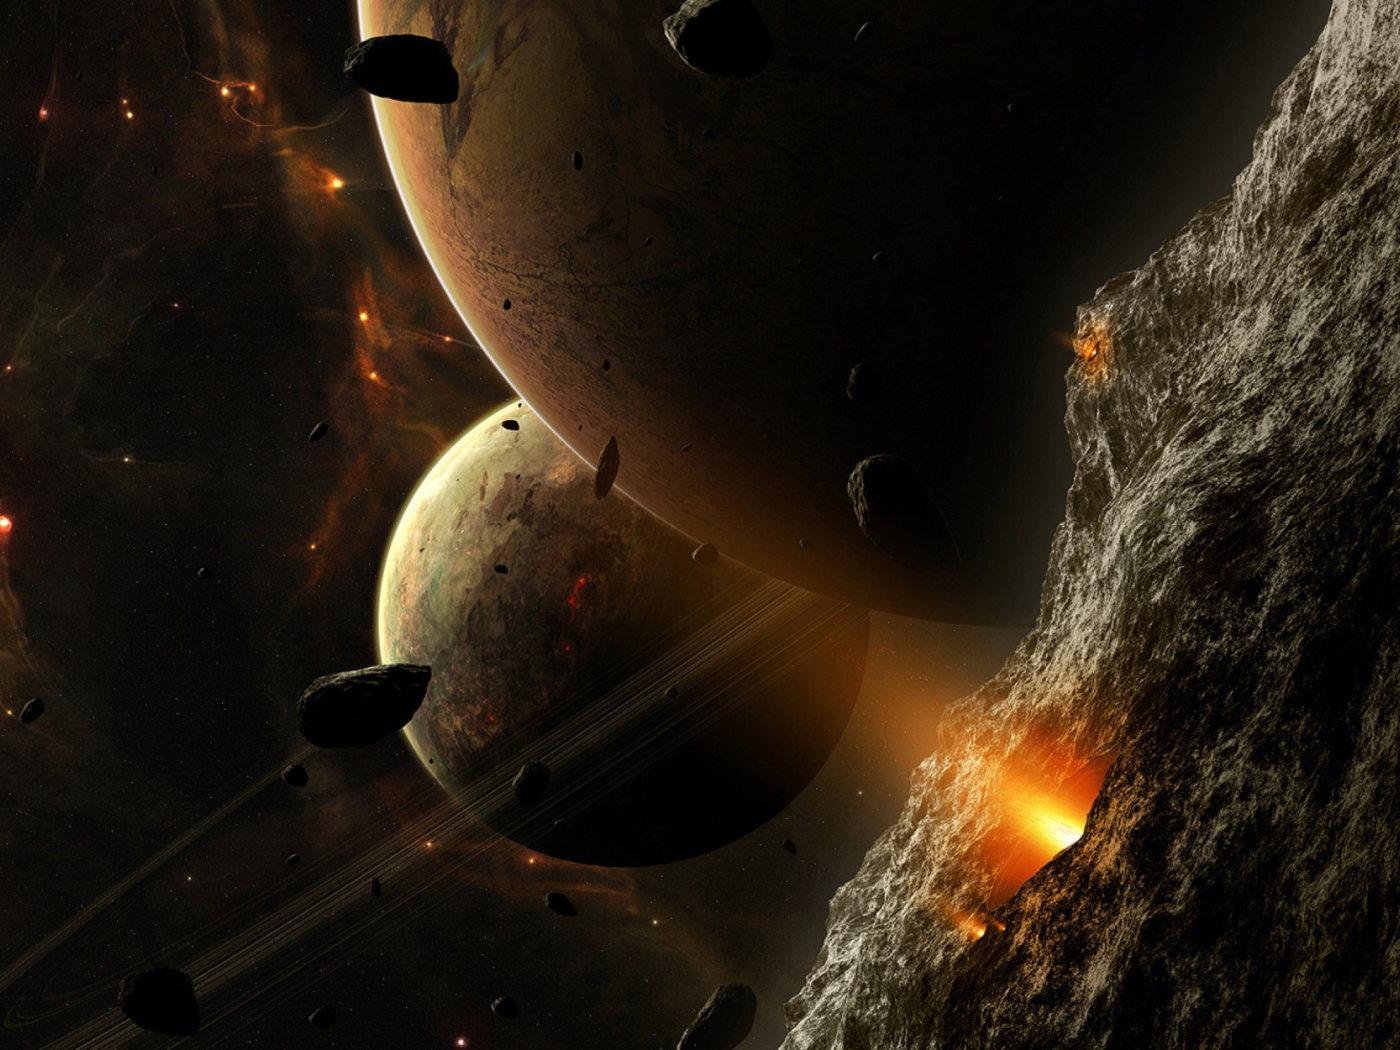 Asteroids And Planets wallpaper 1400x1050